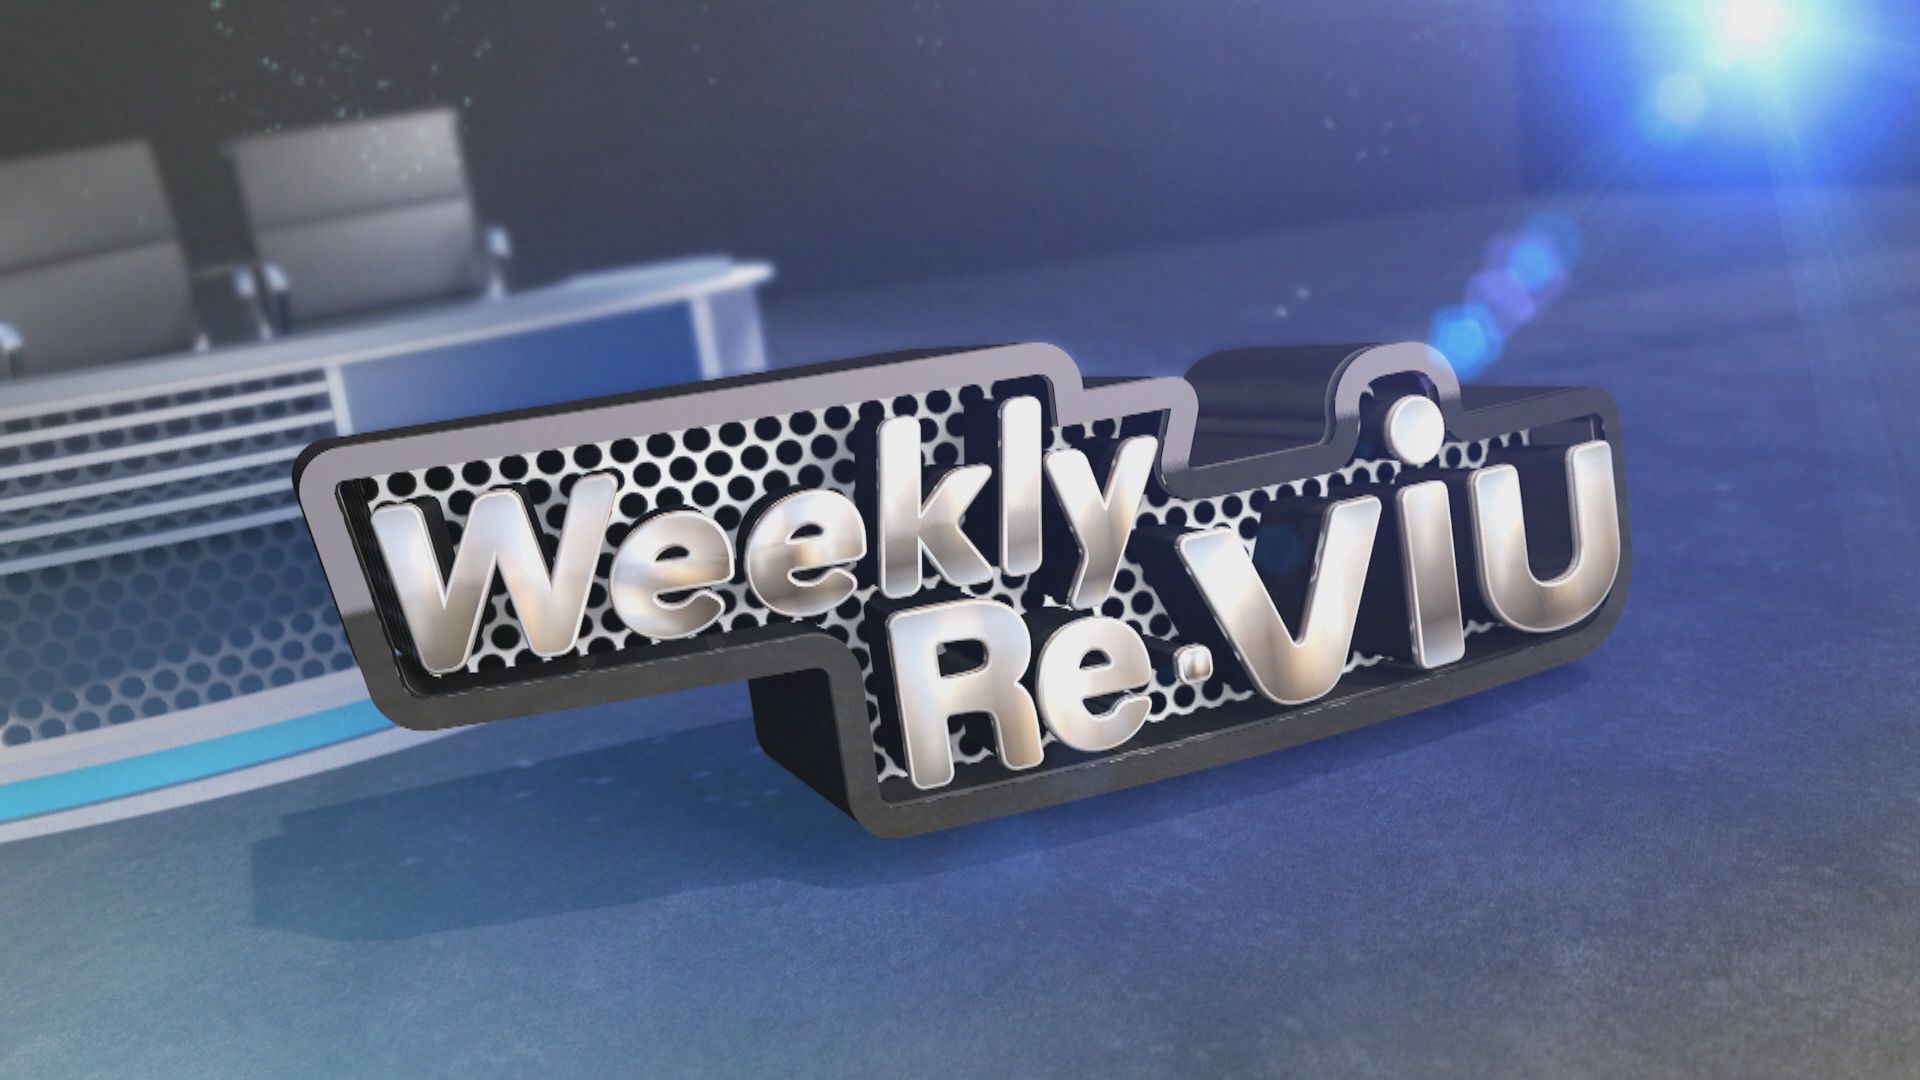 Weekly ReViu | Part One - Guest Chat (24.6.2023)